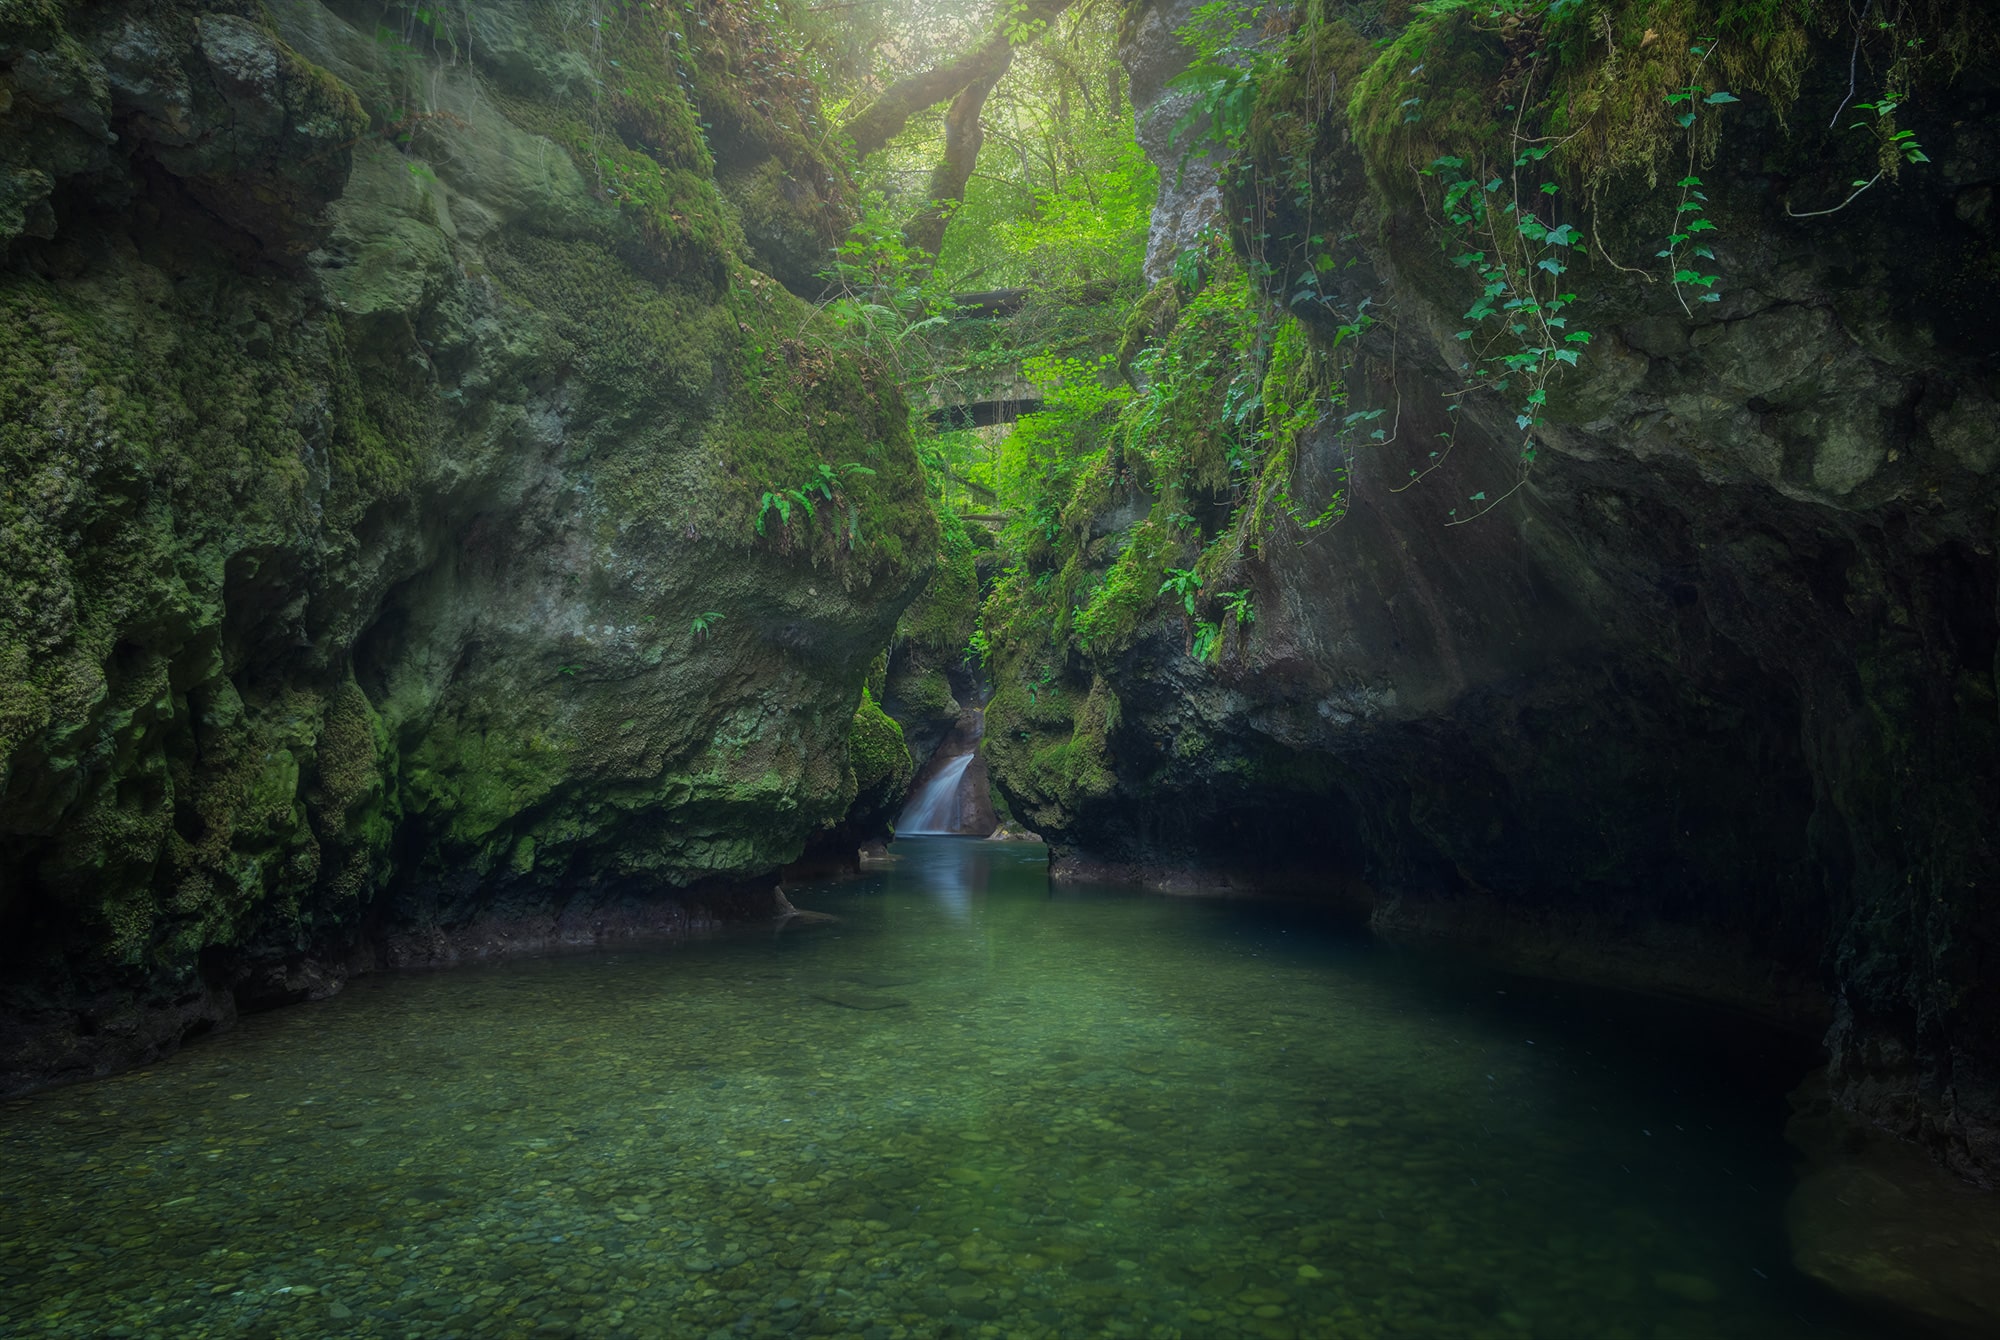 Embark on a journey through a fairytale forest with this stunning long exposure landscape photograph capturing a majestic waterfall nestled within a mossy canyon in Switzerland. Witness the ethereal beauty as the water cascades gracefully amidst the lush greenery, creating a scene straight out of a storybook. Immerse yourself in the serene atmosphere and enchanting allure of this natural wonder. Experience the magic of long exposure photography in capturing the timeless beauty of landscapes in this captivating portfolio.